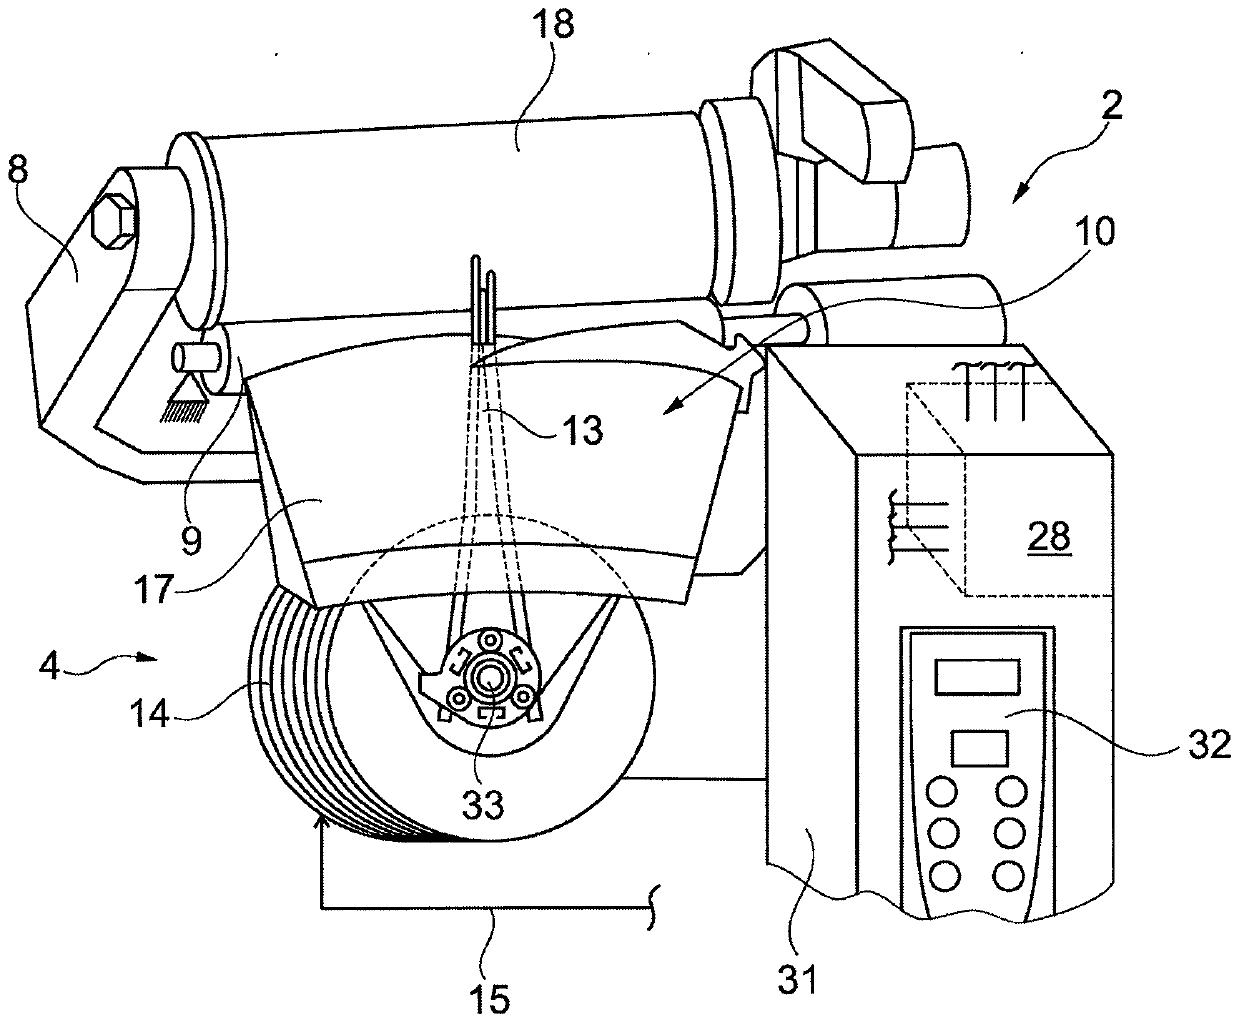 Yarn traversing device comprising motor driver and finger guide